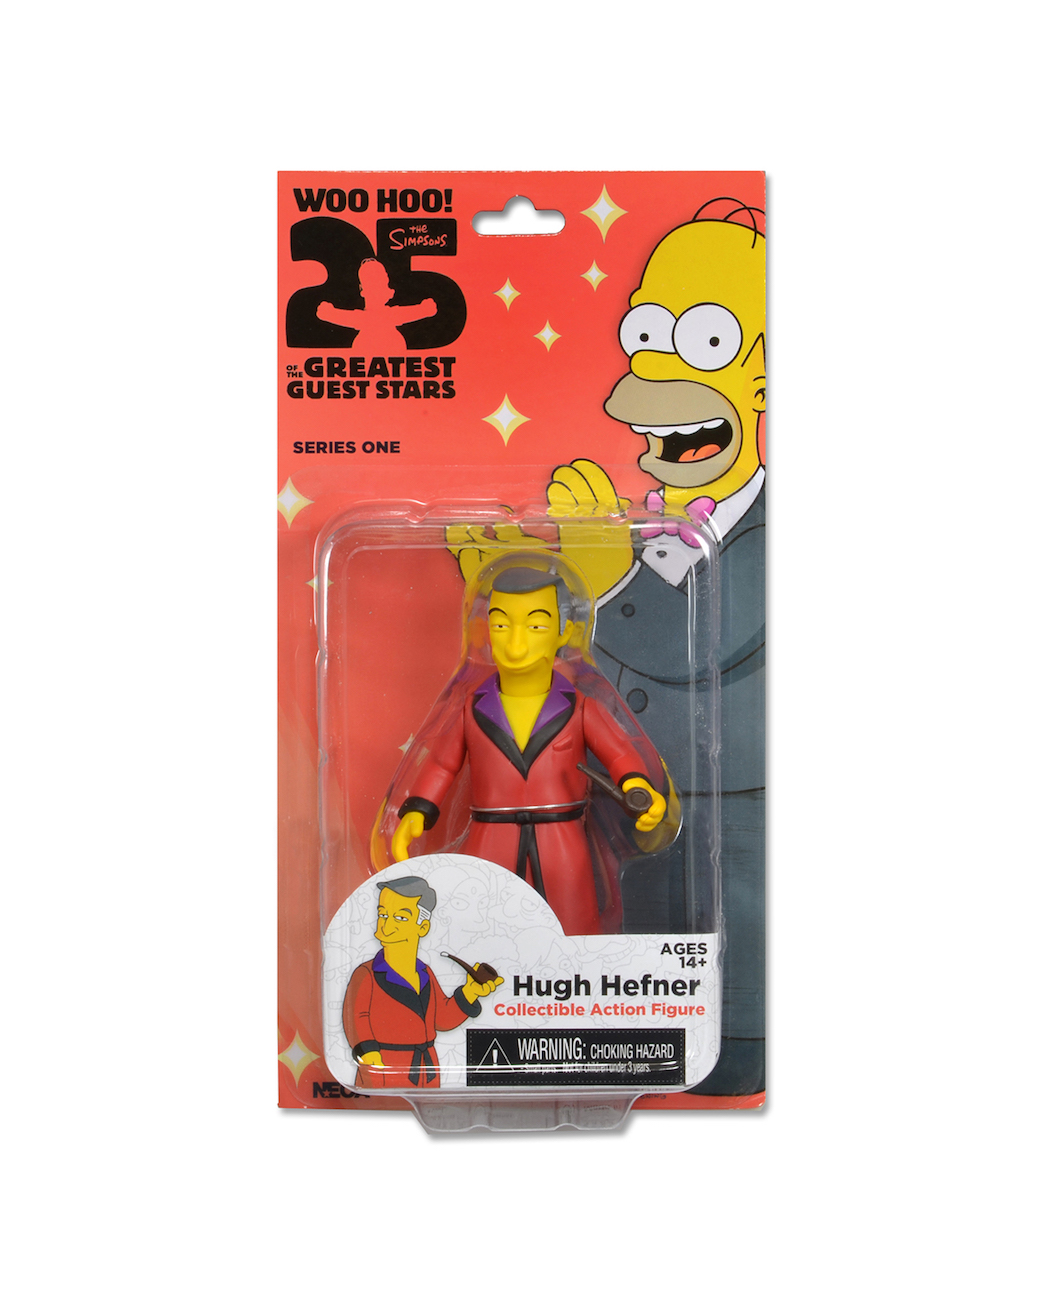 25th Anniversary Weird Al Action Figures 5.1" NECA The Simpsons Series 4 